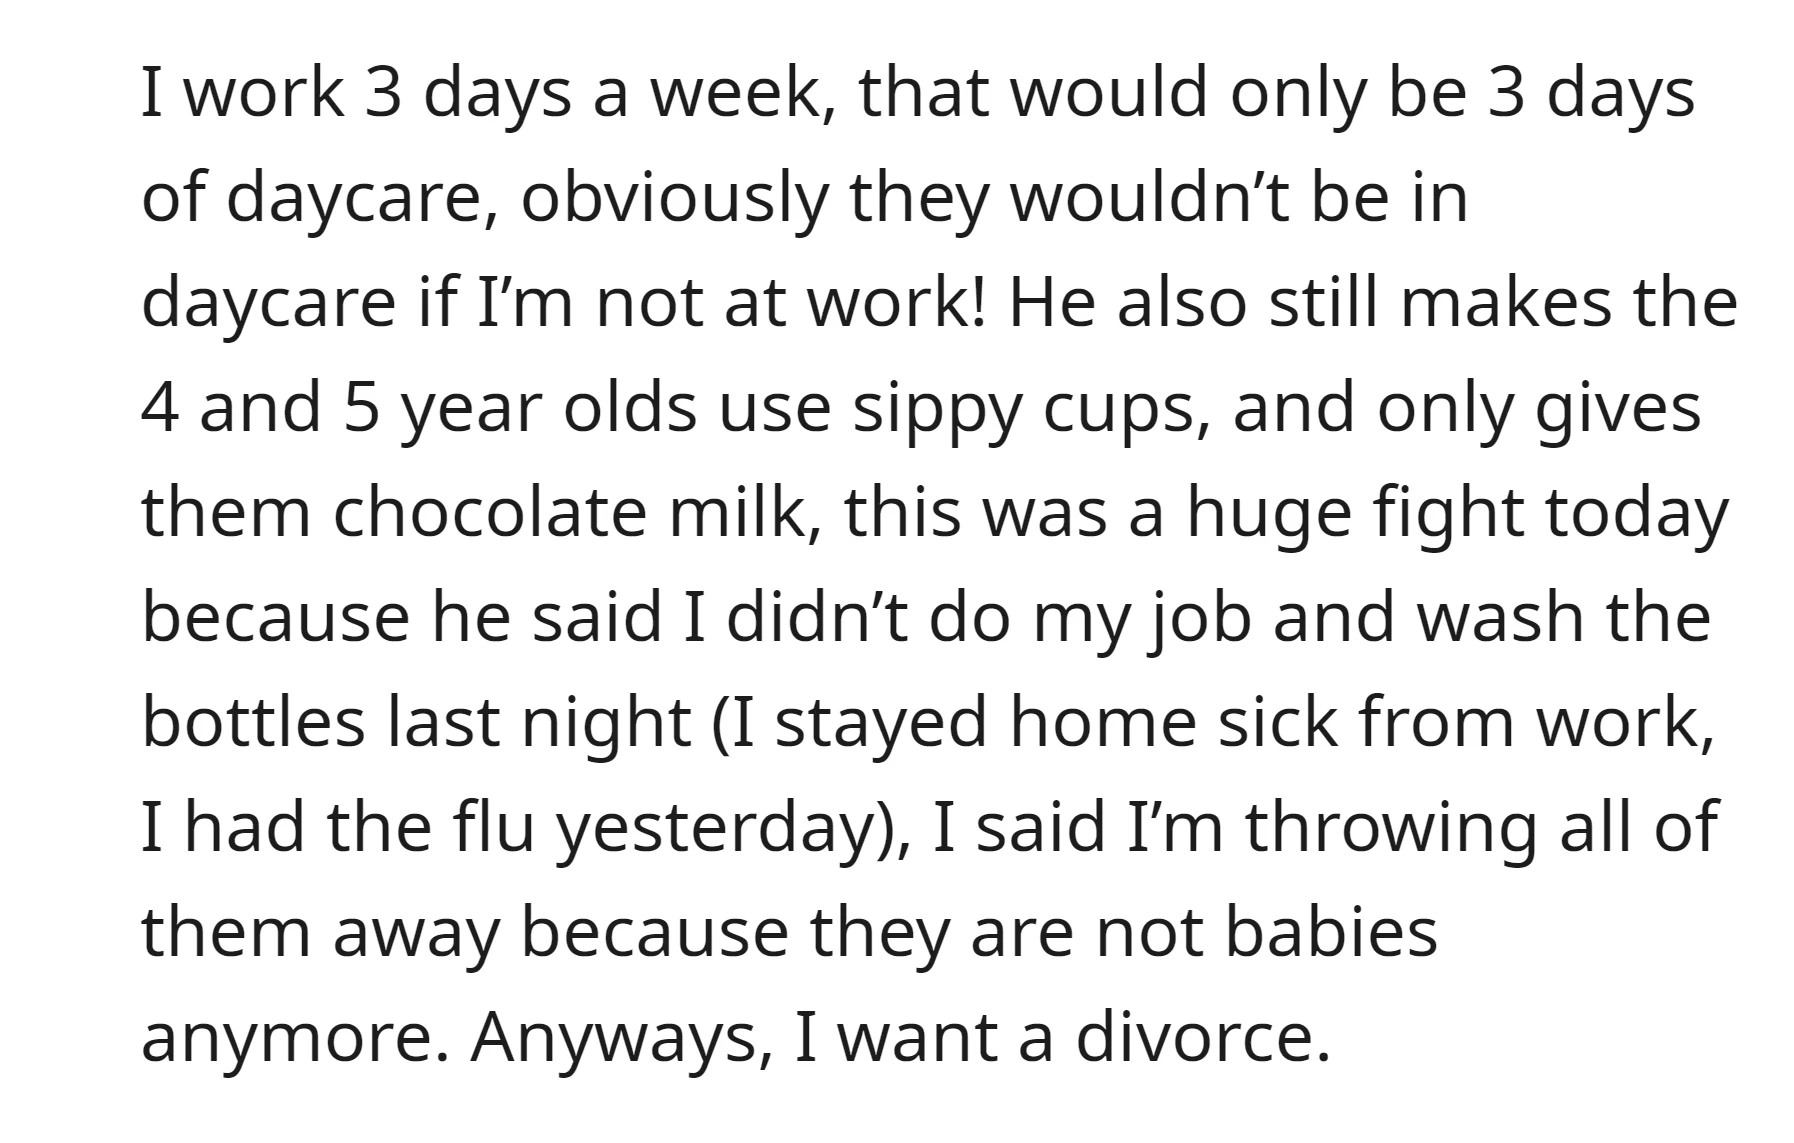 OP faces a disagreement with her husband over childcare and feeding choices